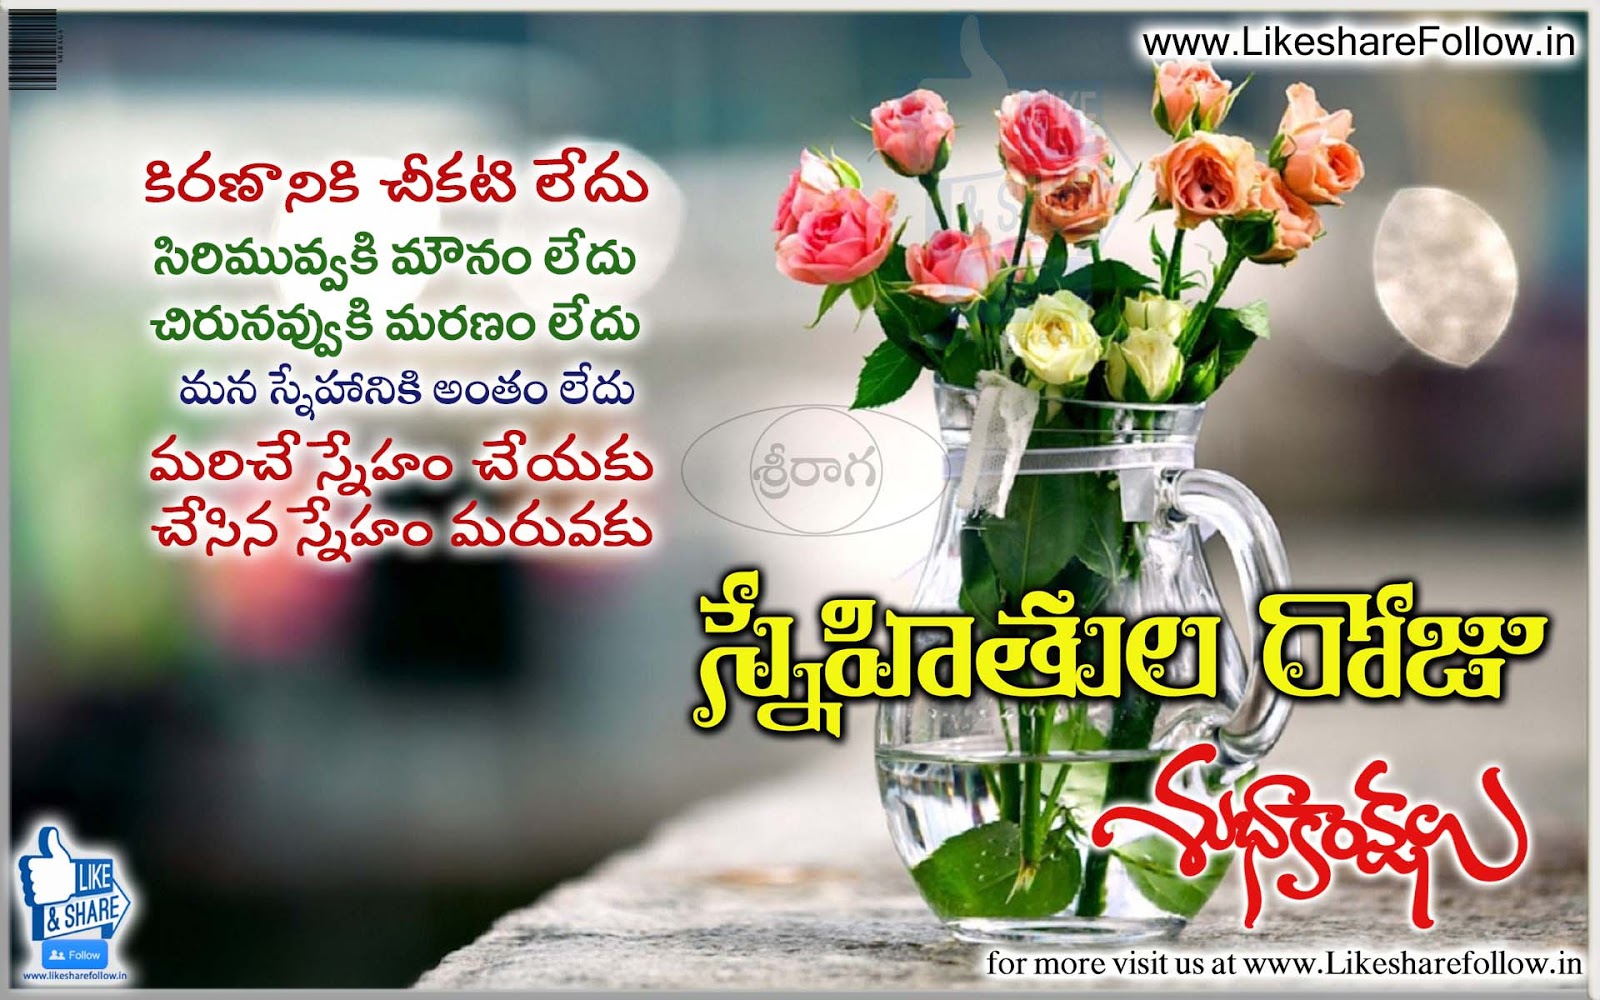 All Time Best Telugu Friendship Day Quotations messages | QUOTES ...